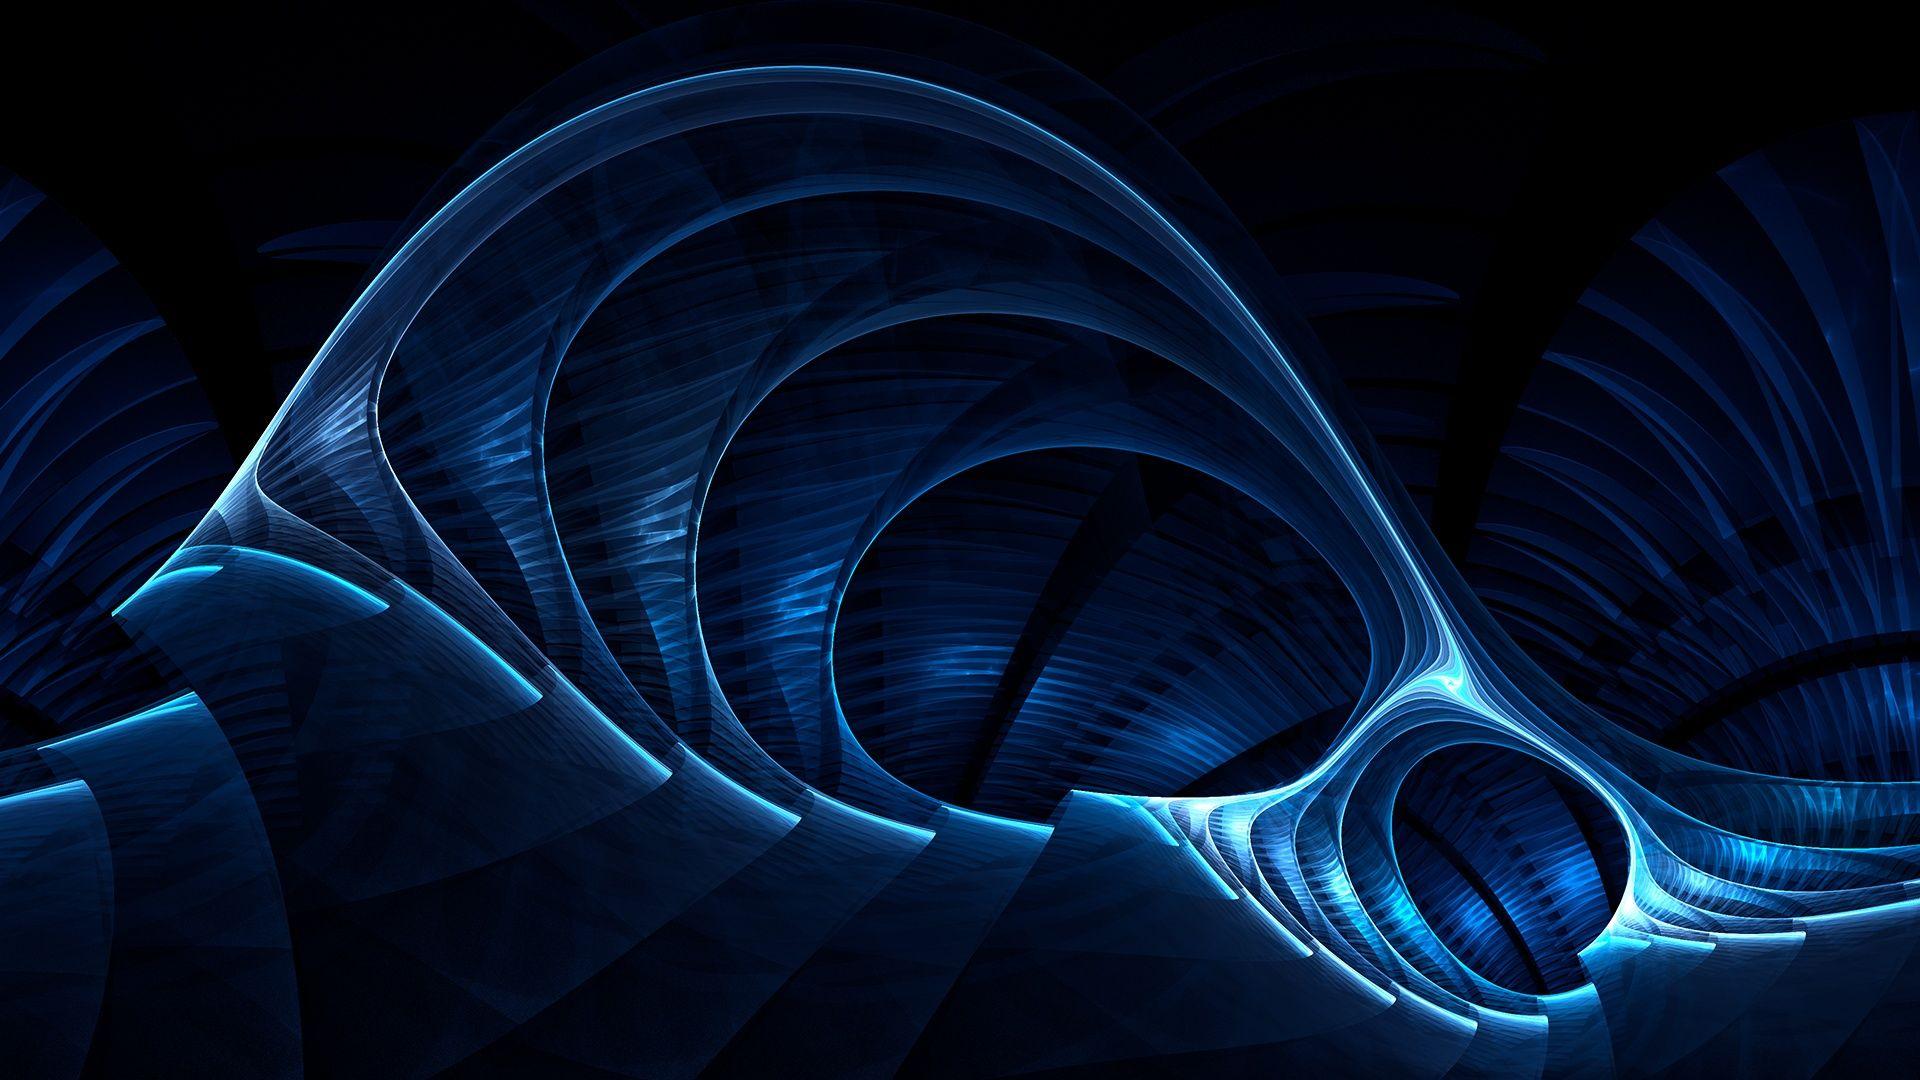 The Wavy Perspective Wallpaper, Download The Wavy Perspective HD